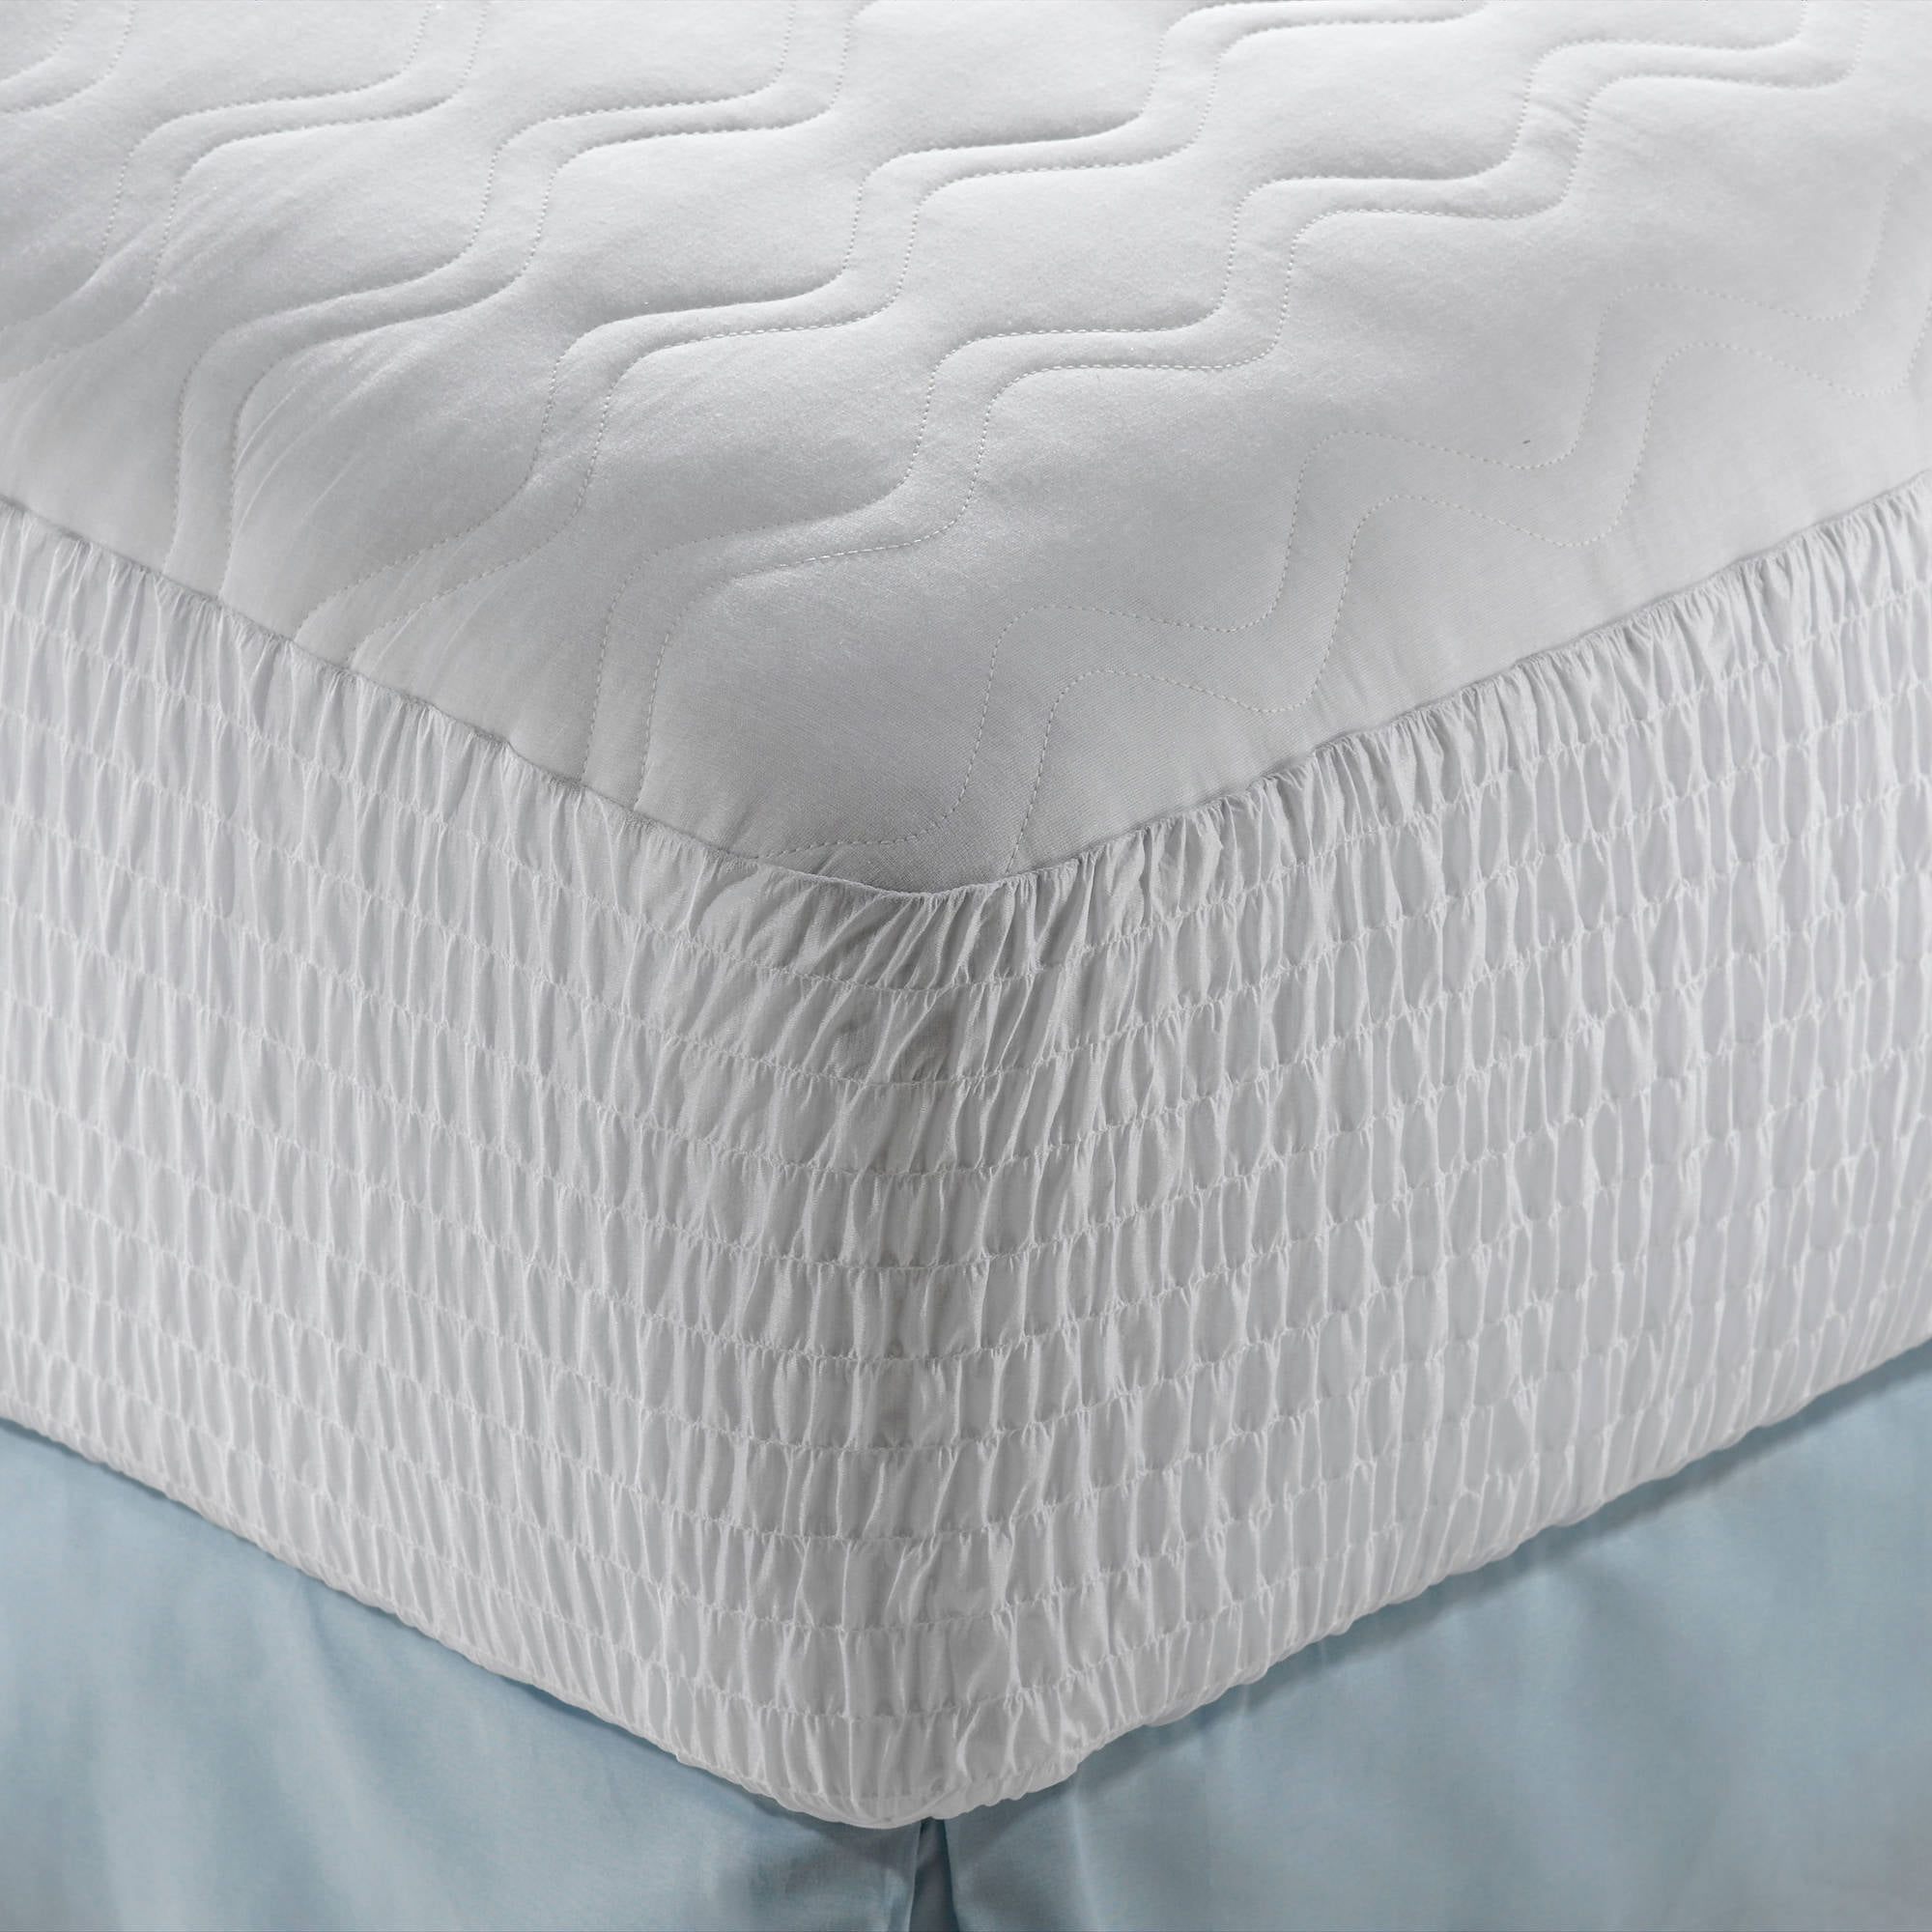 Queen Size Mattress Pad Topper Bedding Cotton Protector ...